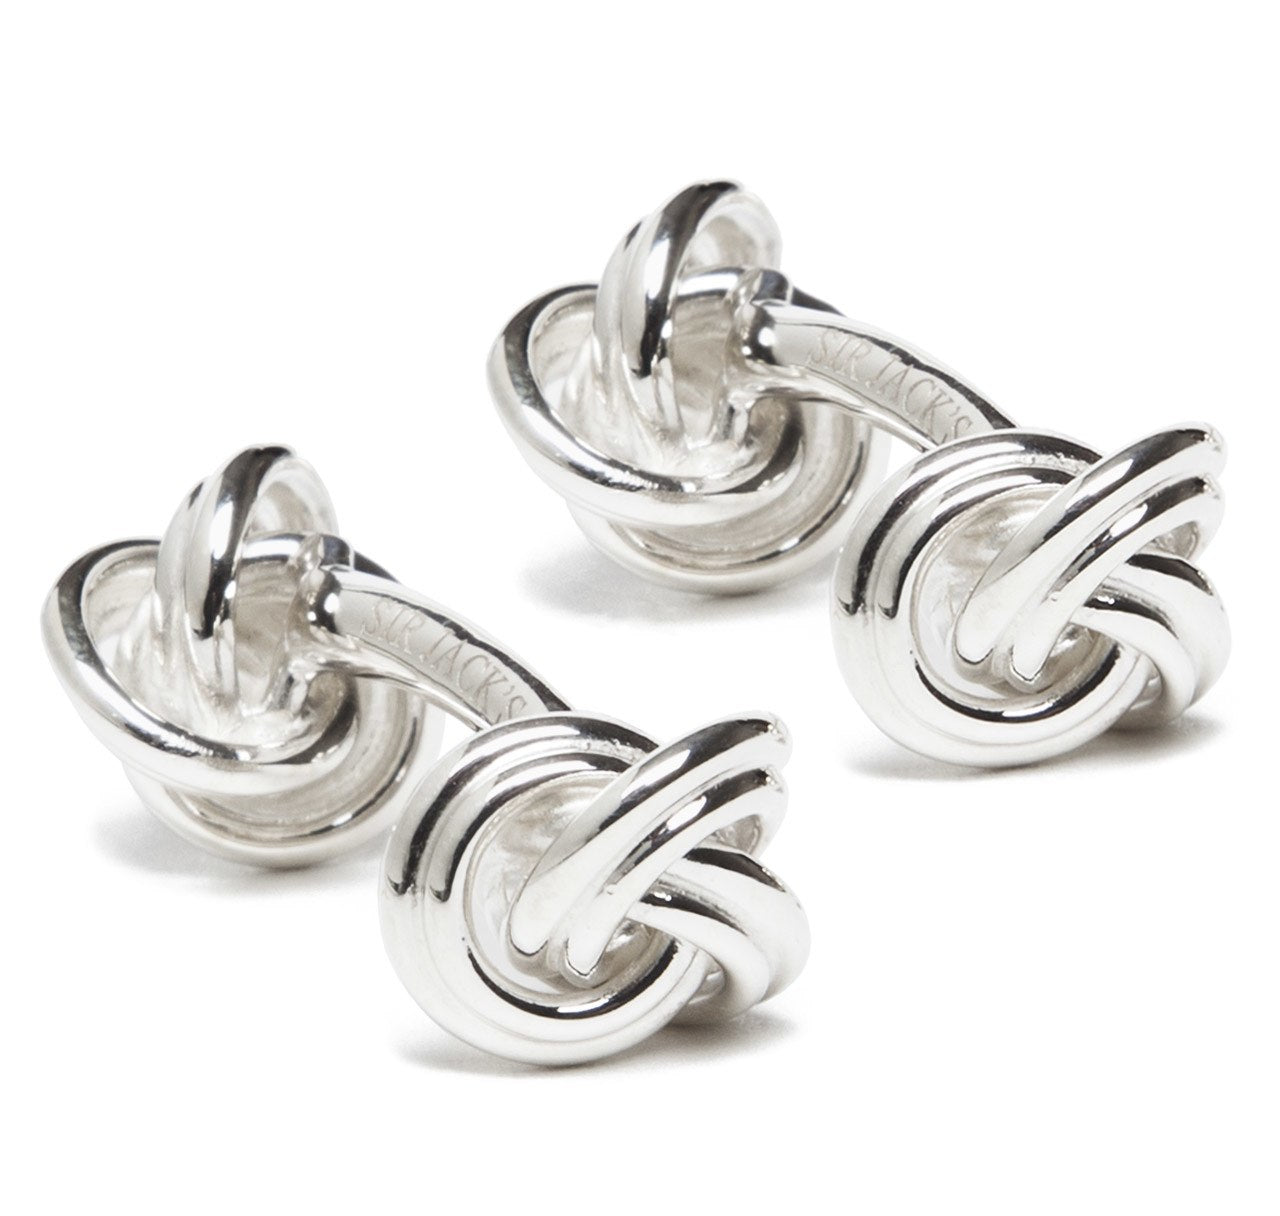 Sir Jack's Sterling Silver Double Knot Cufflinks